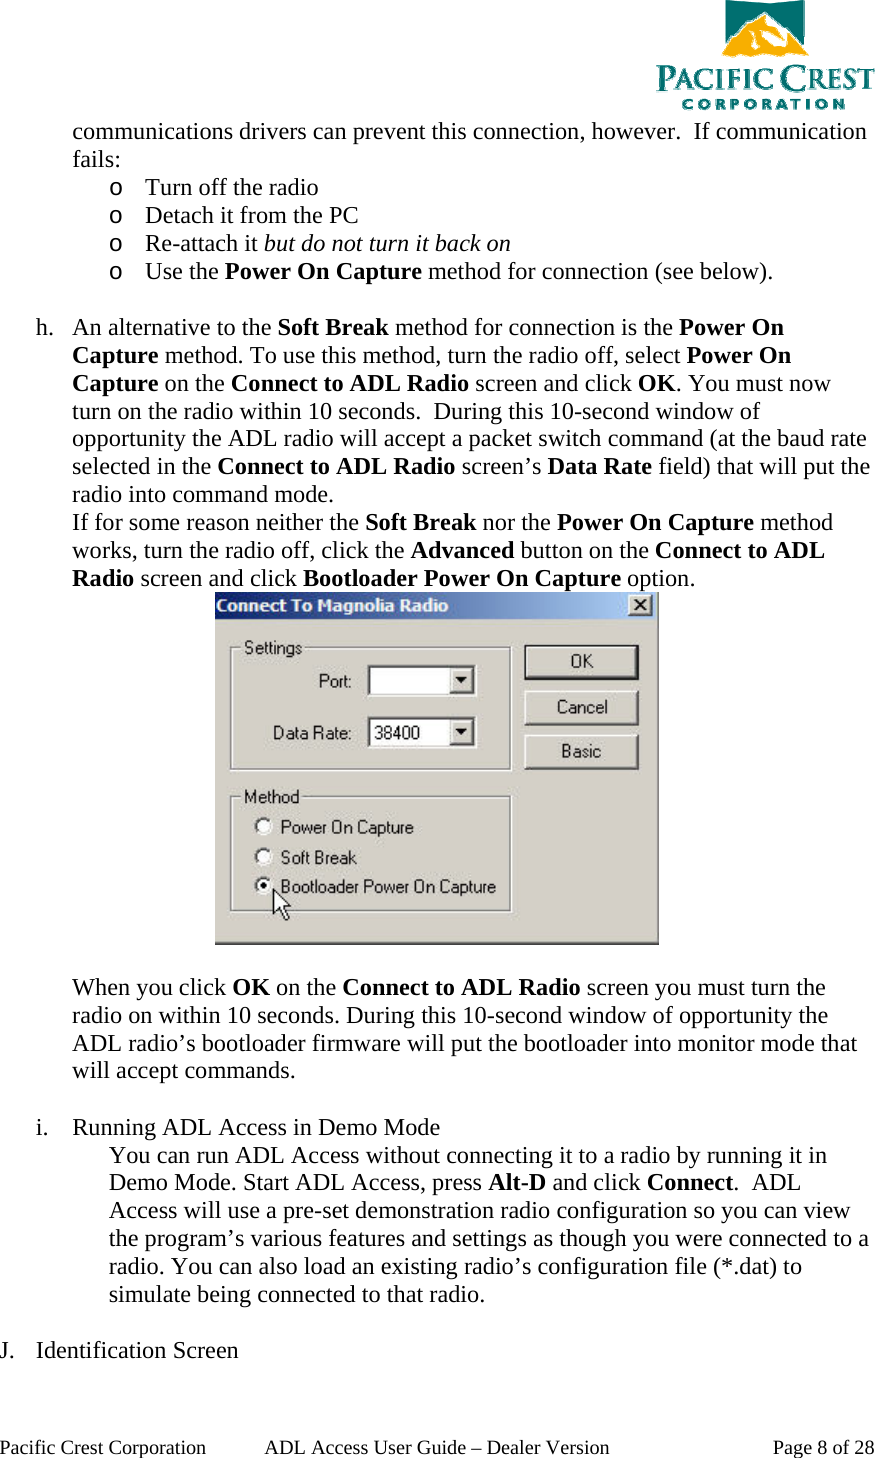  Pacific Crest Corporation  ADL Access User Guide – Dealer Version  Page 8 of 28 communications drivers can prevent this connection, however.  If communication fails: o Turn off the radio o Detach it from the PC o Re-attach it but do not turn it back on o Use the Power On Capture method for connection (see below).  h. An alternative to the Soft Break method for connection is the Power On Capture method. To use this method, turn the radio off, select Power On Capture on the Connect to ADL Radio screen and click OK. You must now turn on the radio within 10 seconds.  During this 10-second window of opportunity the ADL radio will accept a packet switch command (at the baud rate selected in the Connect to ADL Radio screen’s Data Rate field) that will put the radio into command mode. If for some reason neither the Soft Break nor the Power On Capture method works, turn the radio off, click the Advanced button on the Connect to ADL Radio screen and click Bootloader Power On Capture option.   When you click OK on the Connect to ADL Radio screen you must turn the radio on within 10 seconds. During this 10-second window of opportunity the ADL radio’s bootloader firmware will put the bootloader into monitor mode that will accept commands.  i. Running ADL Access in Demo Mode You can run ADL Access without connecting it to a radio by running it in Demo Mode. Start ADL Access, press Alt-D and click Connect.  ADL Access will use a pre-set demonstration radio configuration so you can view the program’s various features and settings as though you were connected to a radio. You can also load an existing radio’s configuration file (*.dat) to simulate being connected to that radio.  J. Identification Screen 